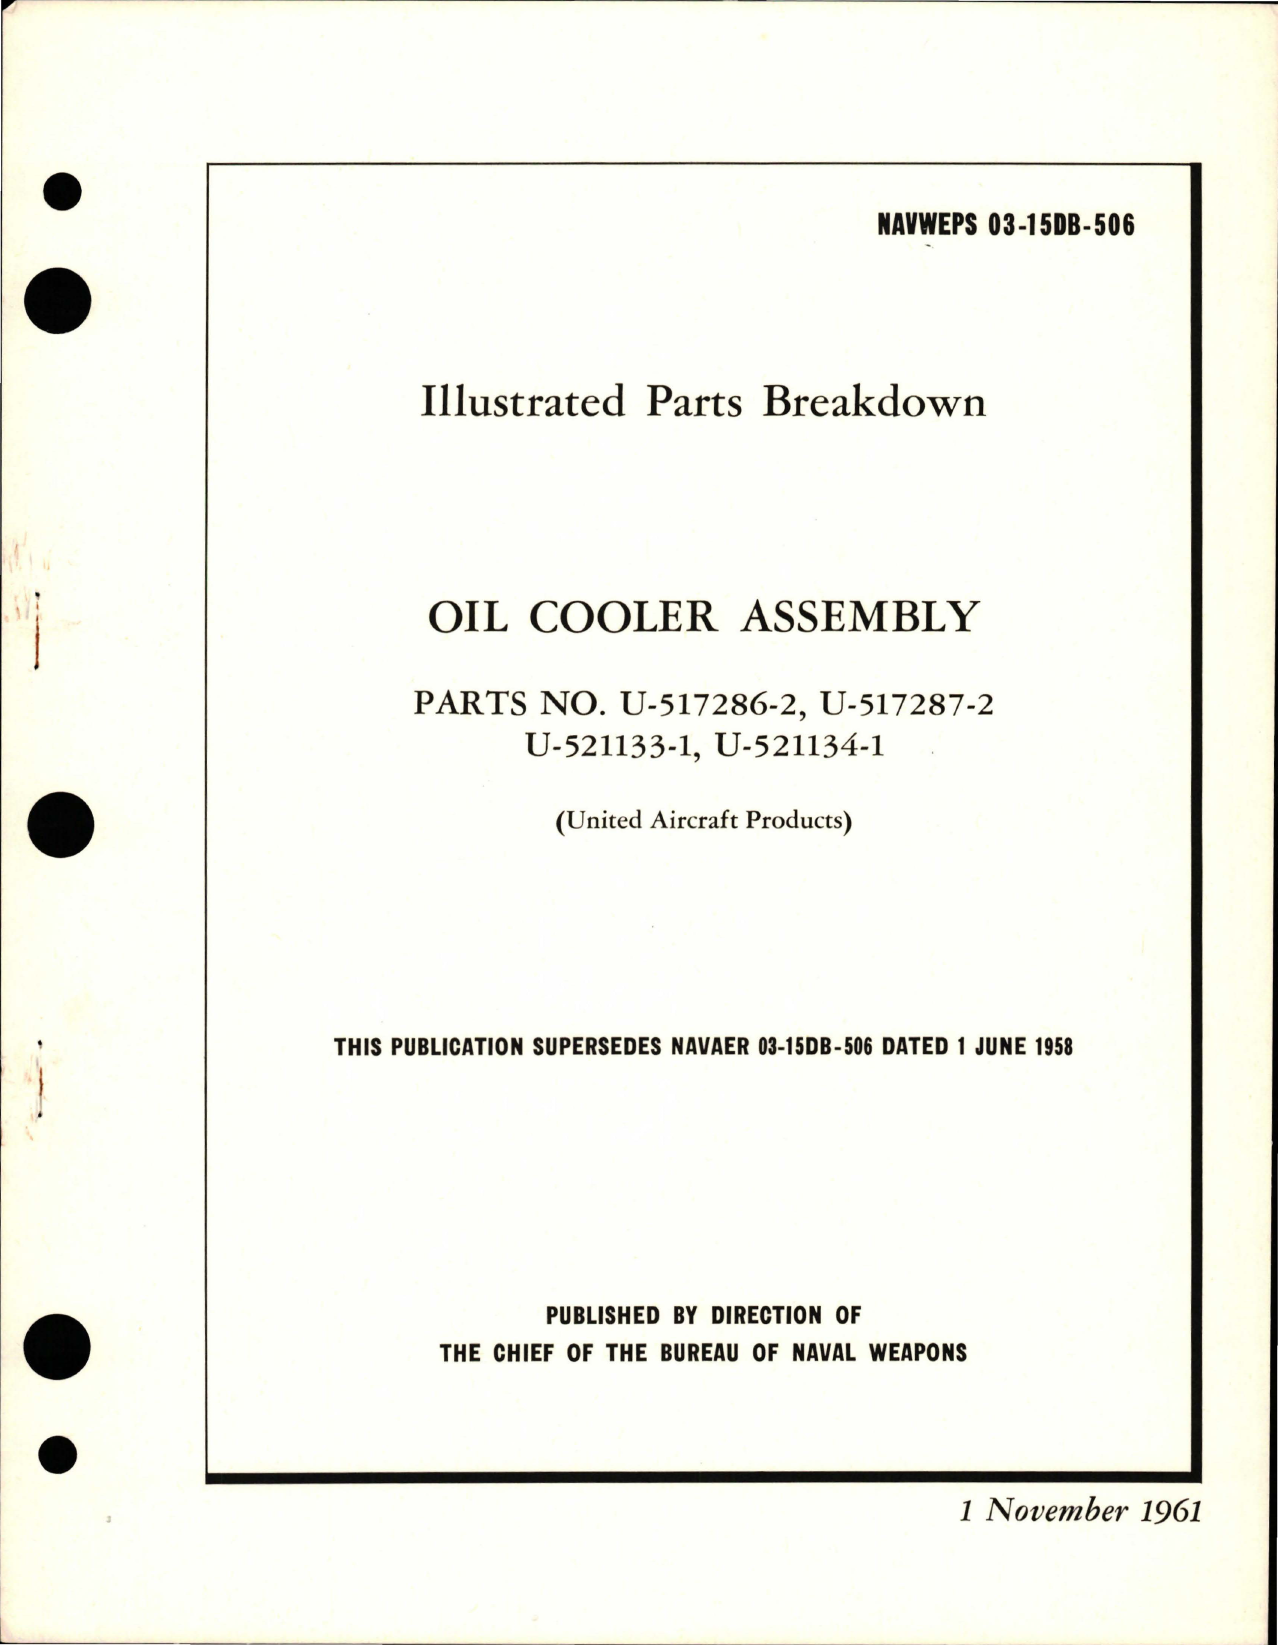 Sample page 1 from AirCorps Library document: Illustrated Parts Breakdown for Oil Cooler Assembly - Parts U-517286-2, U-517287-2, U-521133-1 and U-521134-1